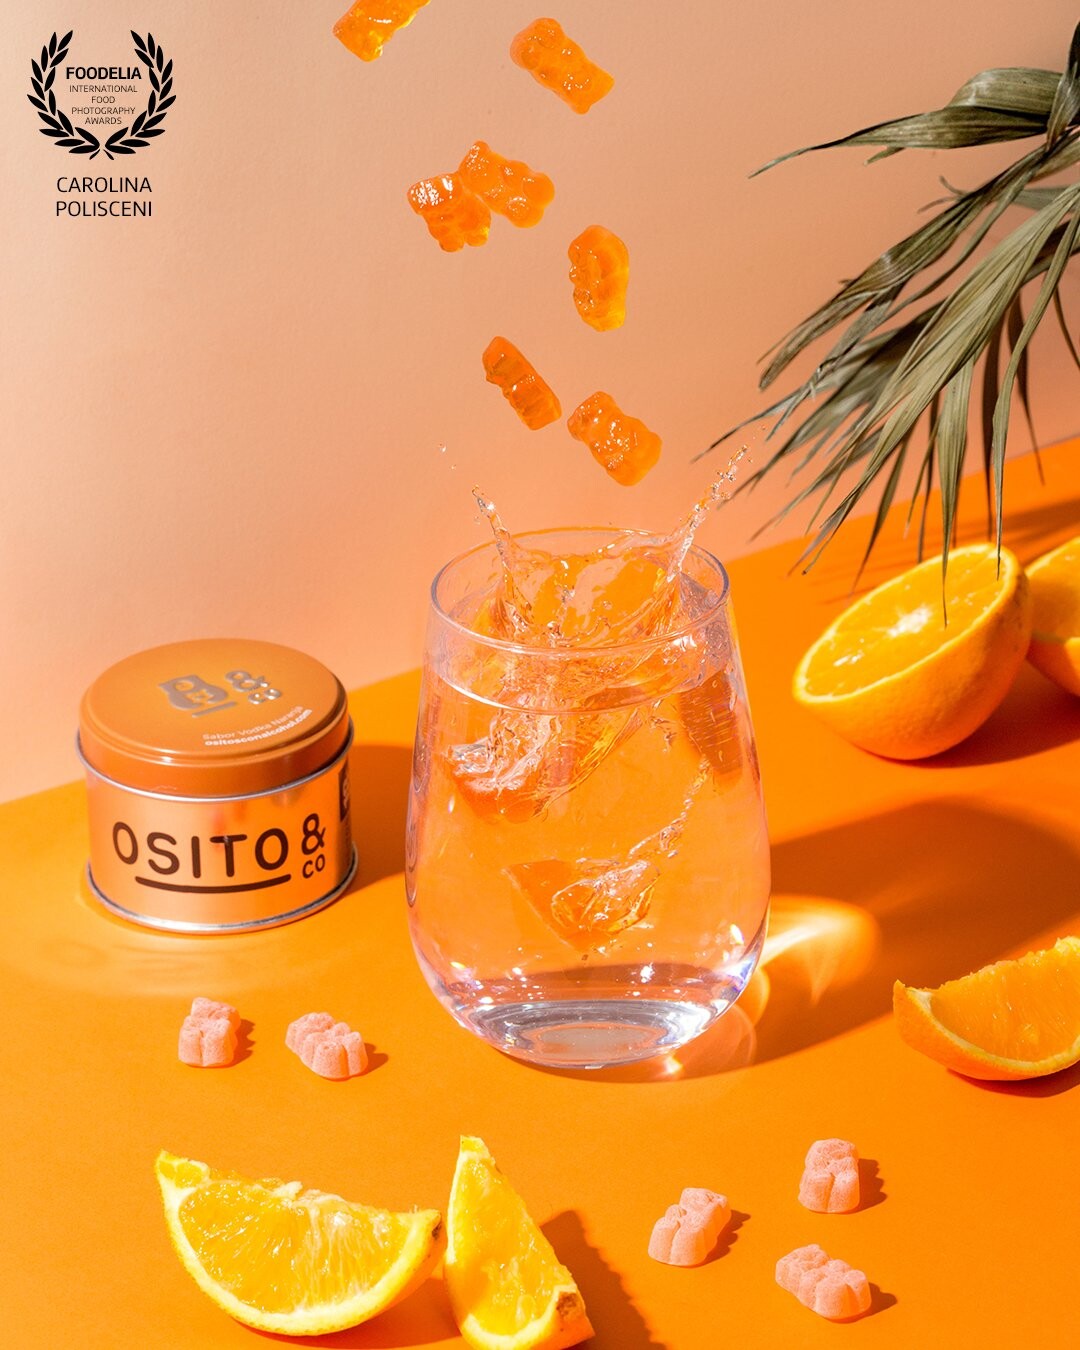 Ositos con Alcohol is a young brand from Spain that sells this jelly bears filled with alcohol, the perfect adult candy. They wanted to show party mood, and also the usage of the product